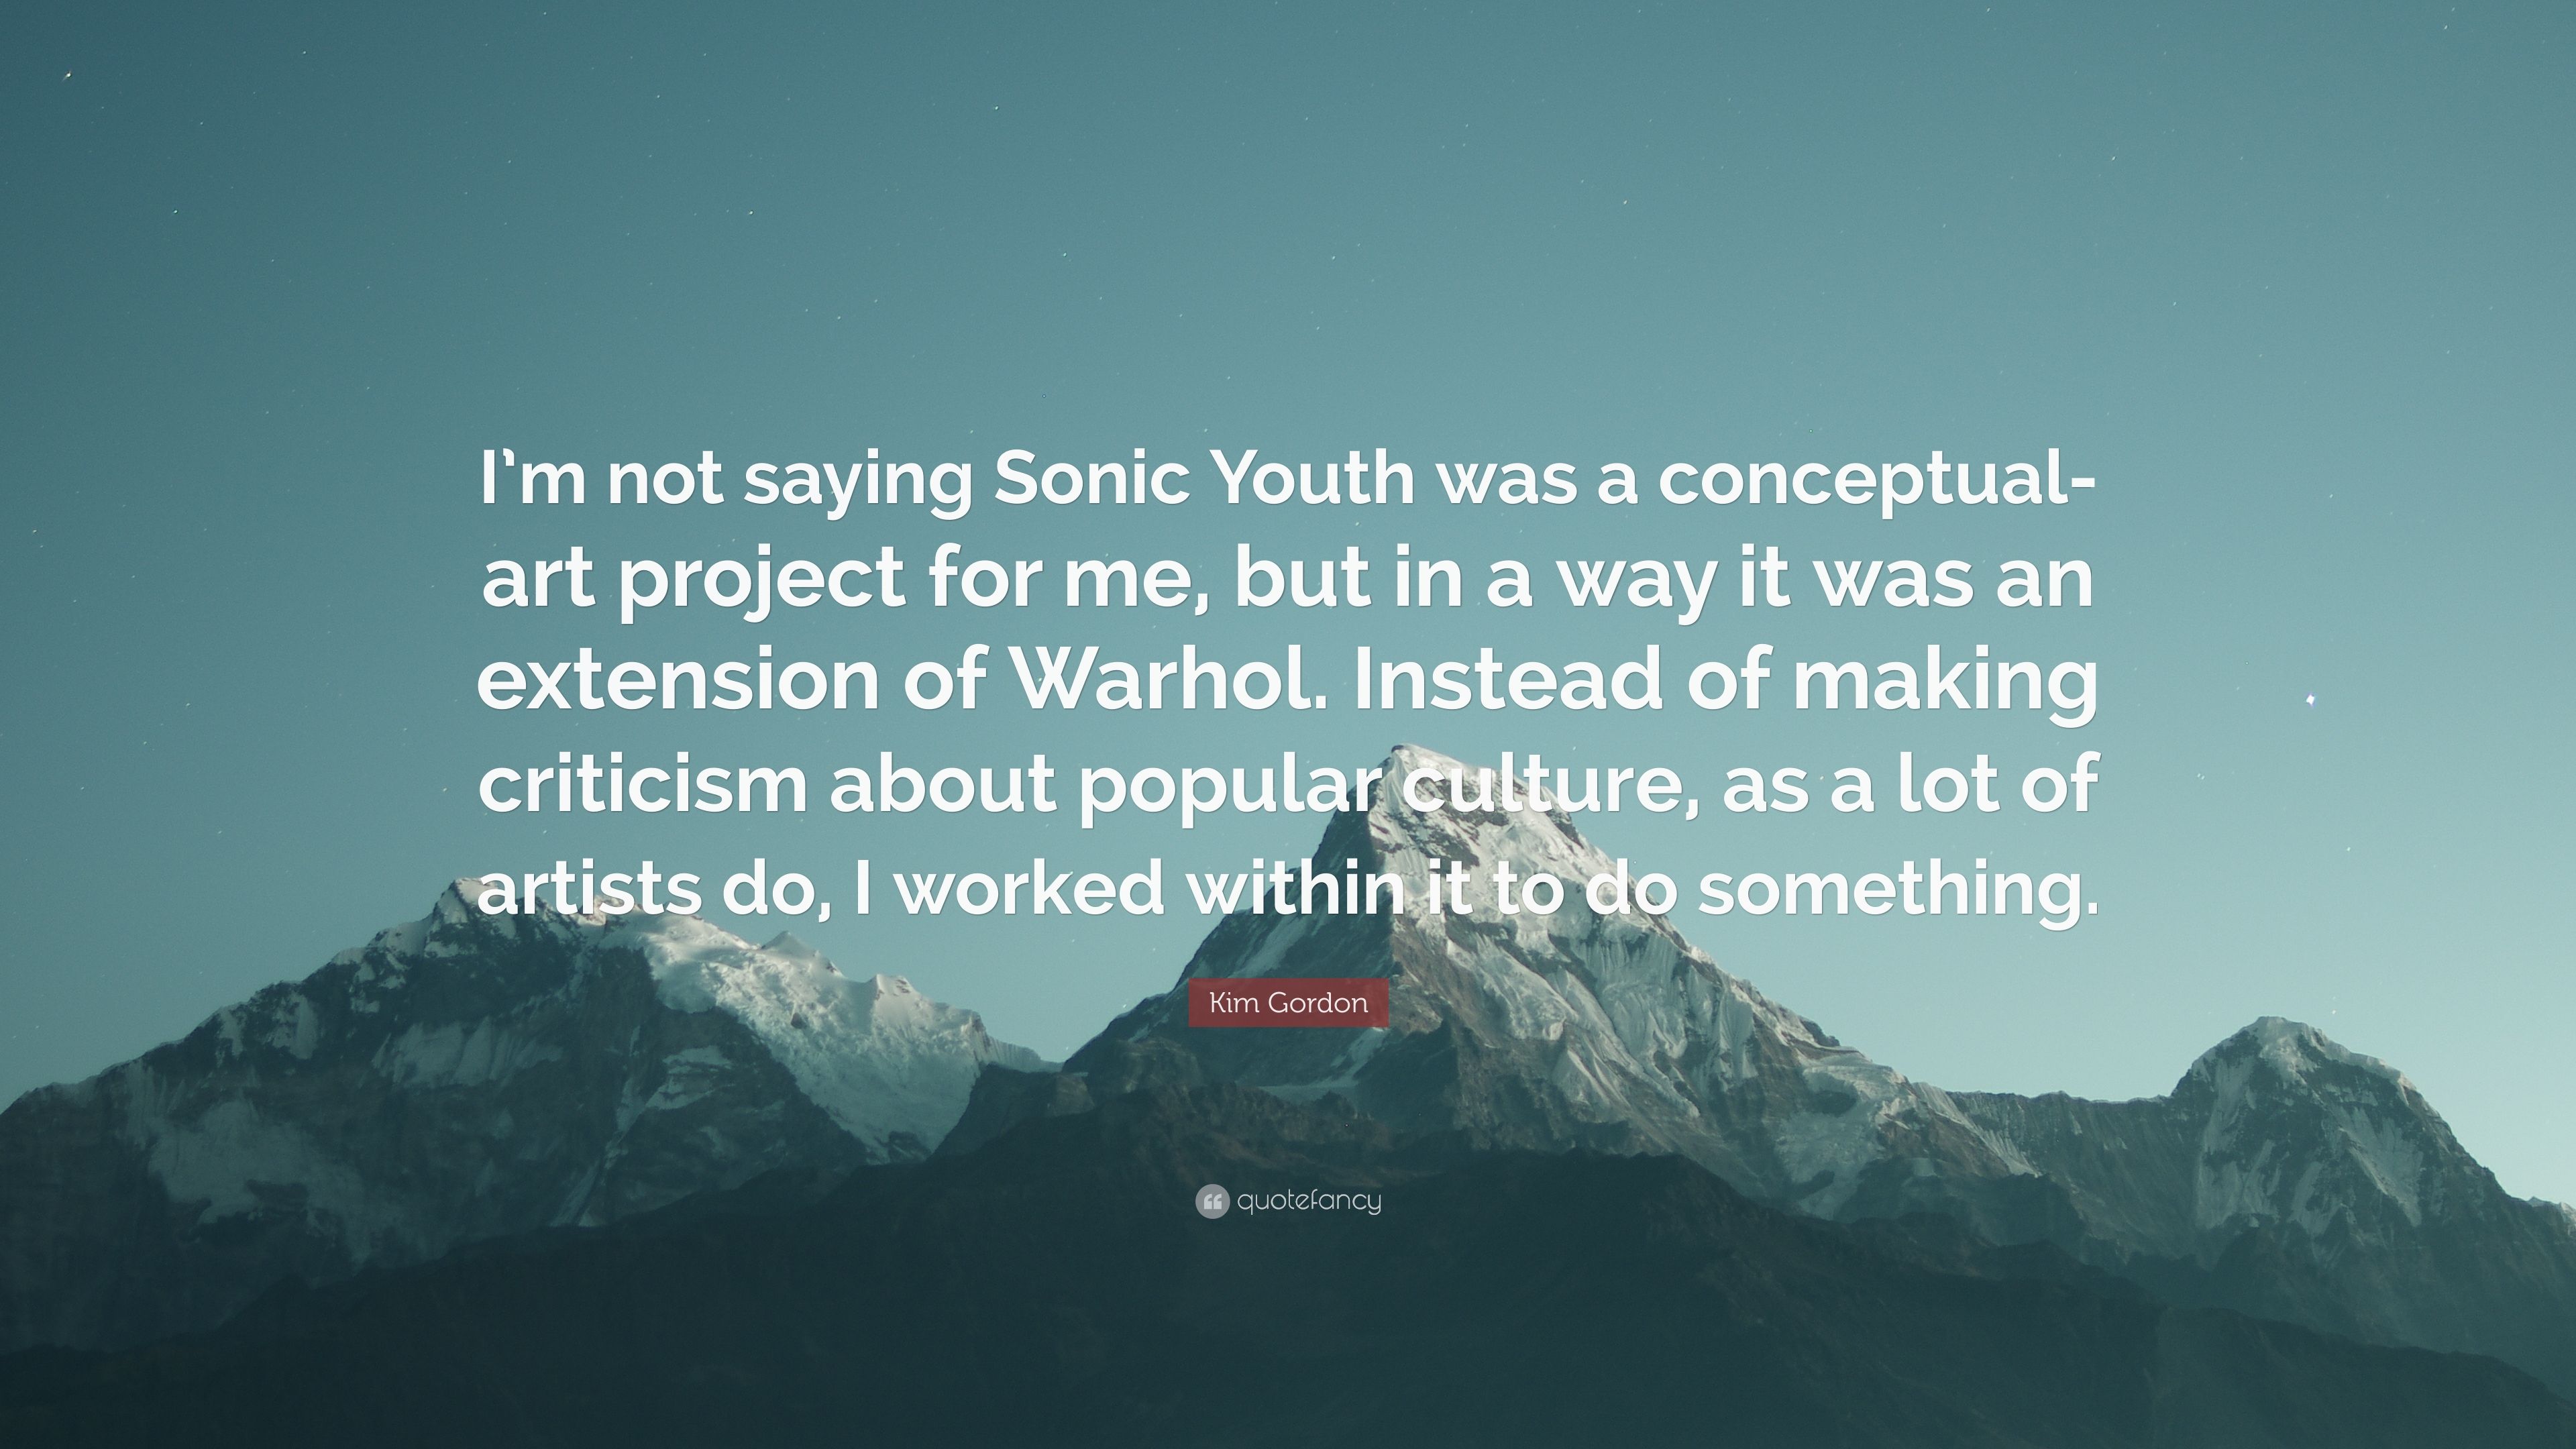 7 Quotes About Sonic Youth